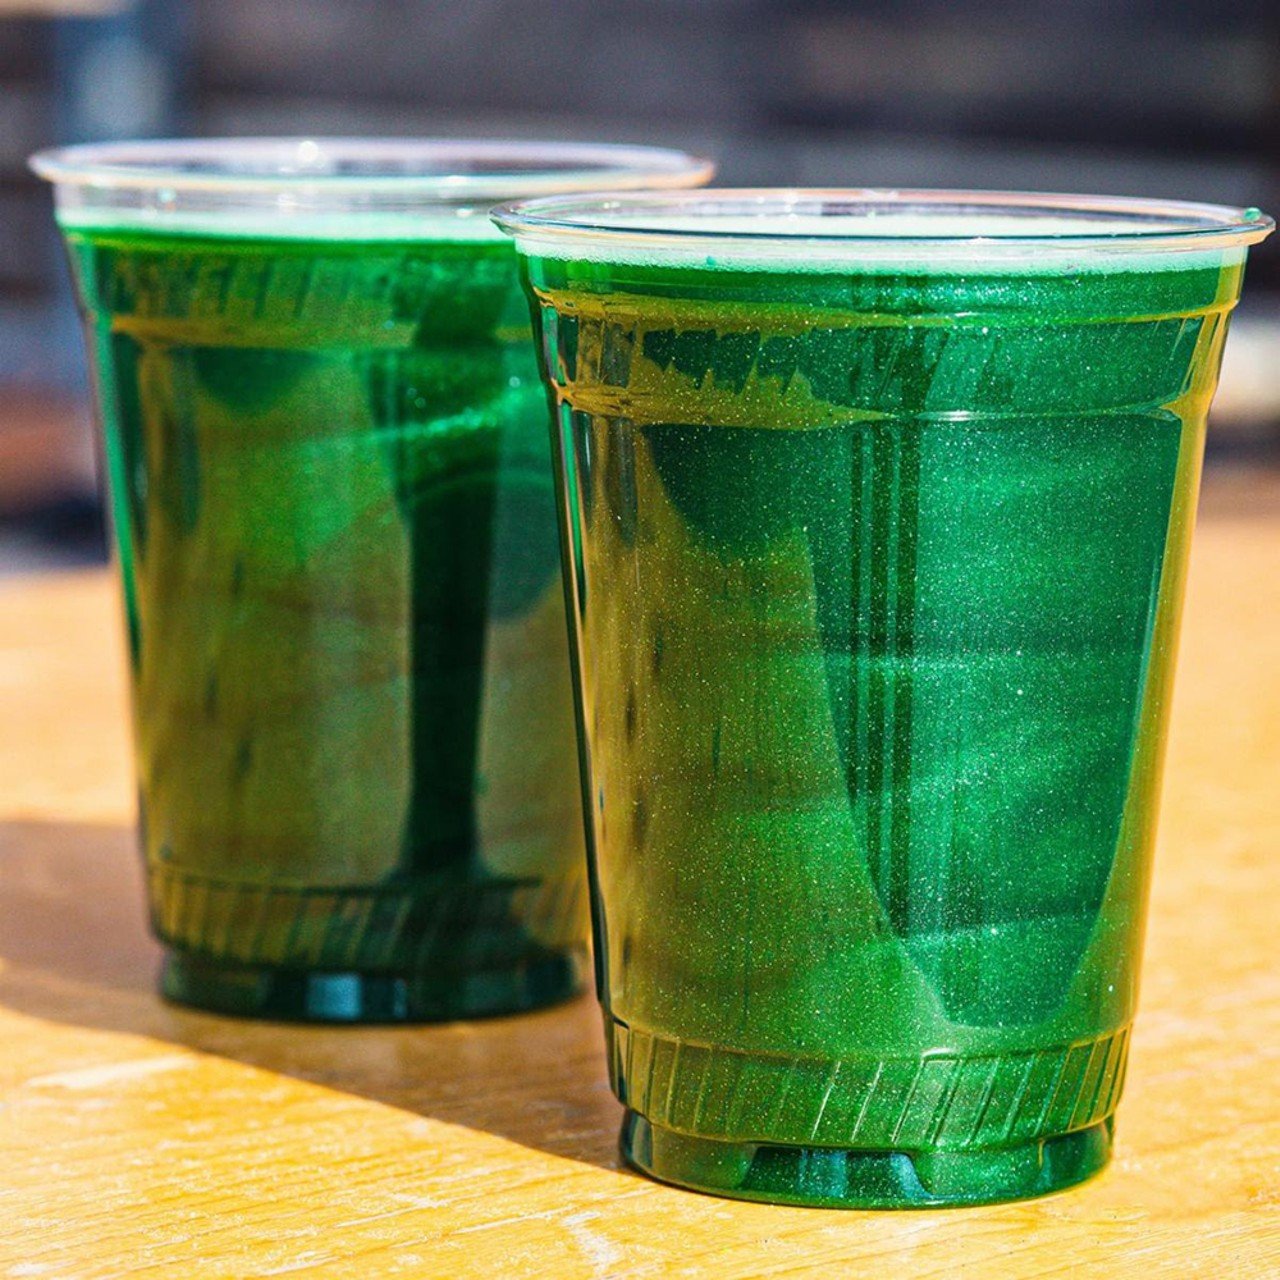 Grab a glittery, green beer at Fifty West Brewery
When: March 17 from 11 a.m. to 11 p.m.
Where: Fifty West, Mariemont
What: St. Patrick's Day Festivities
Who: Fifty West
Why: Green beer! But holding a beer doesn't count as wearing green.